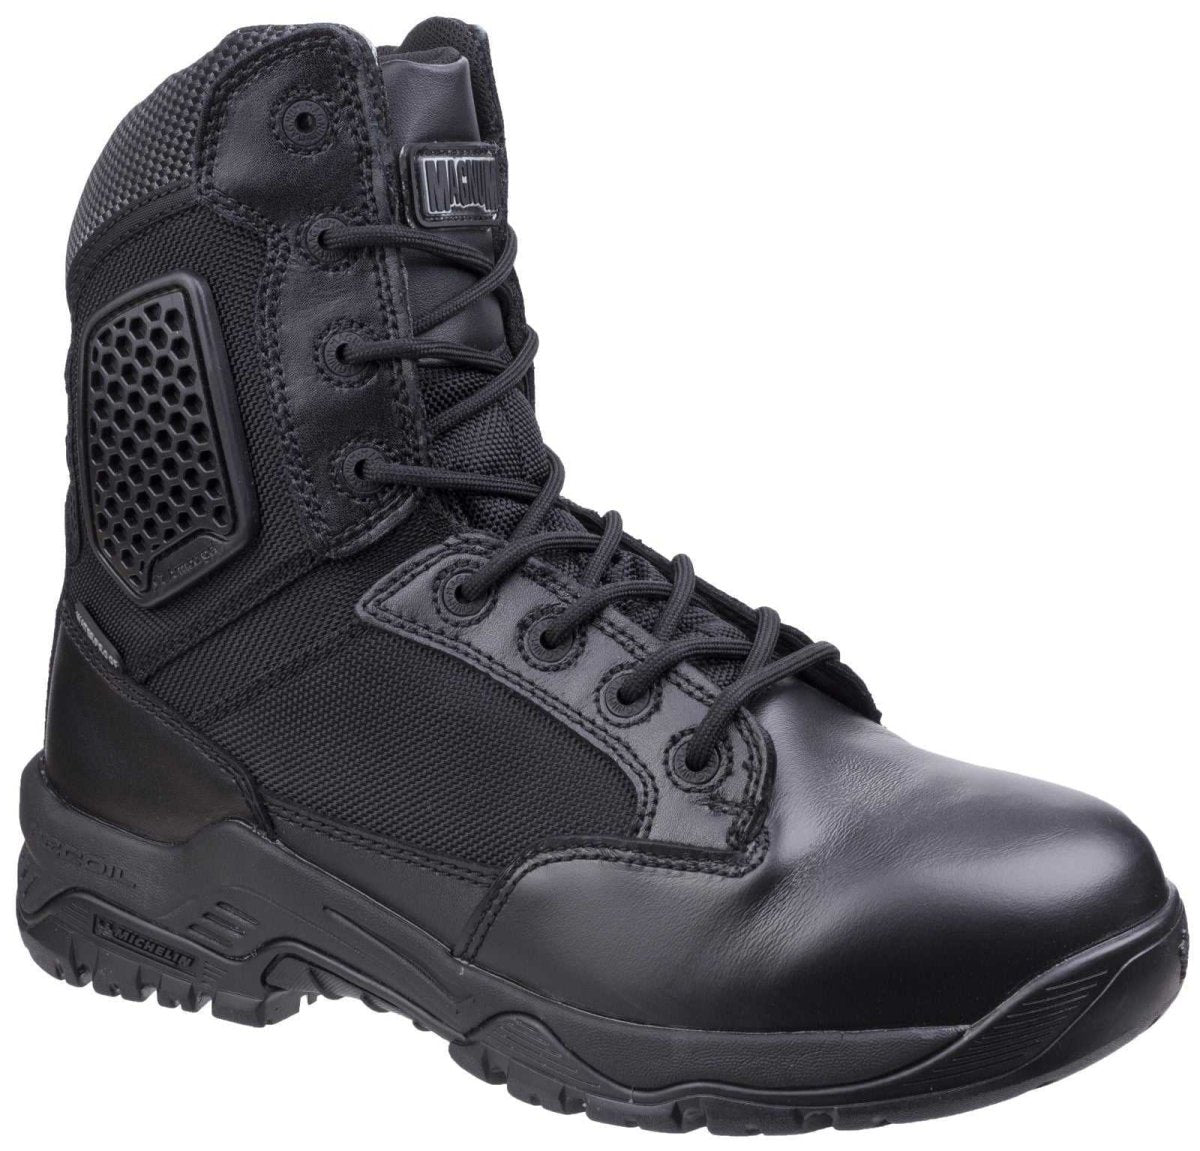 Magnum Strike Force 8.0 Leather & Mesh Safety Boots - Shoe Store Direct